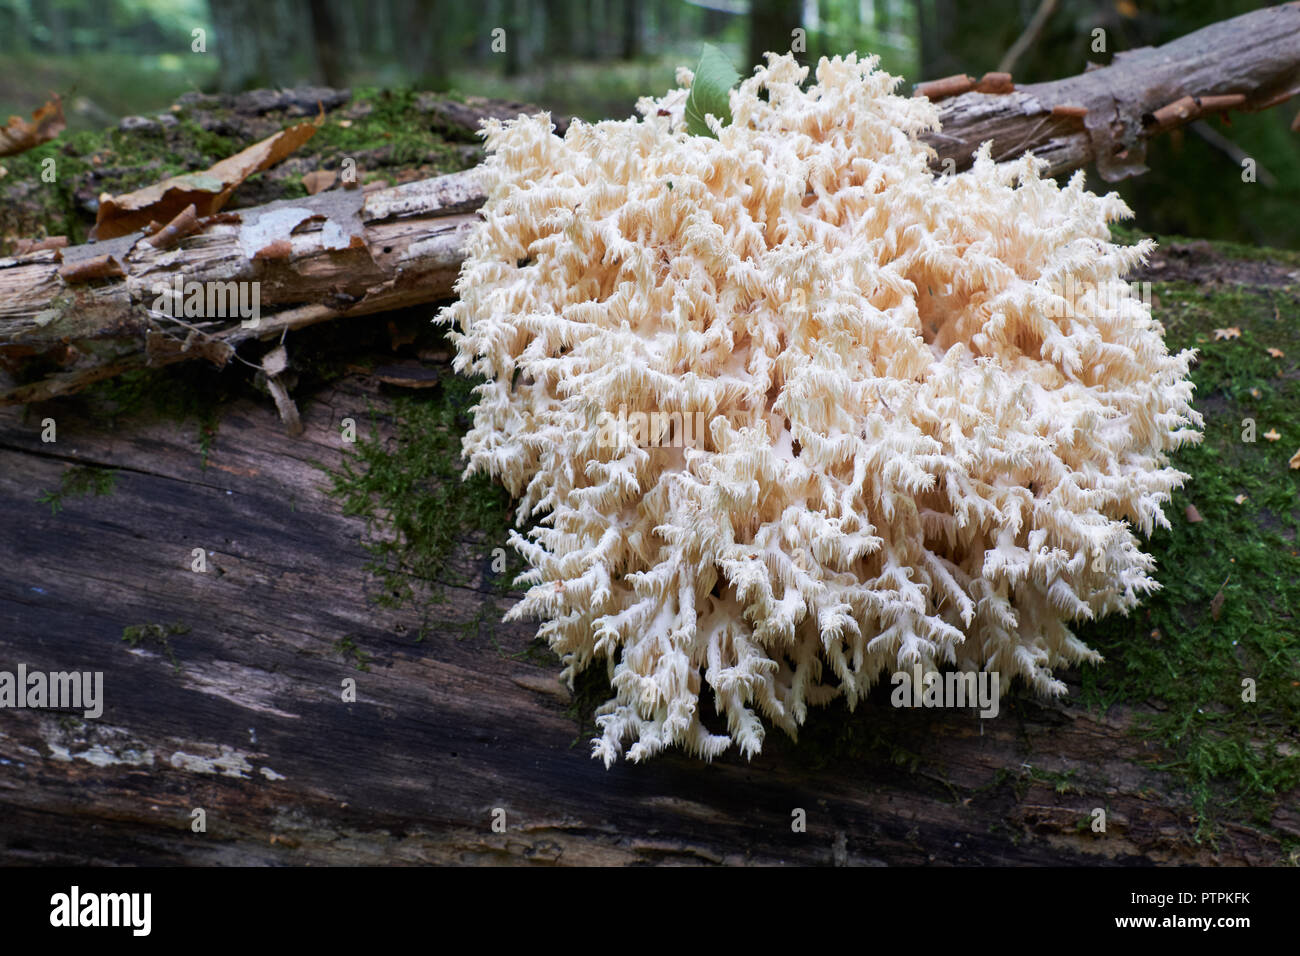 Coral tooth fungus (Hericium ramosum) close up on hardwood broken tree log with some moss in background, Bialowieza Forest, Poland, Europe Stock Photo